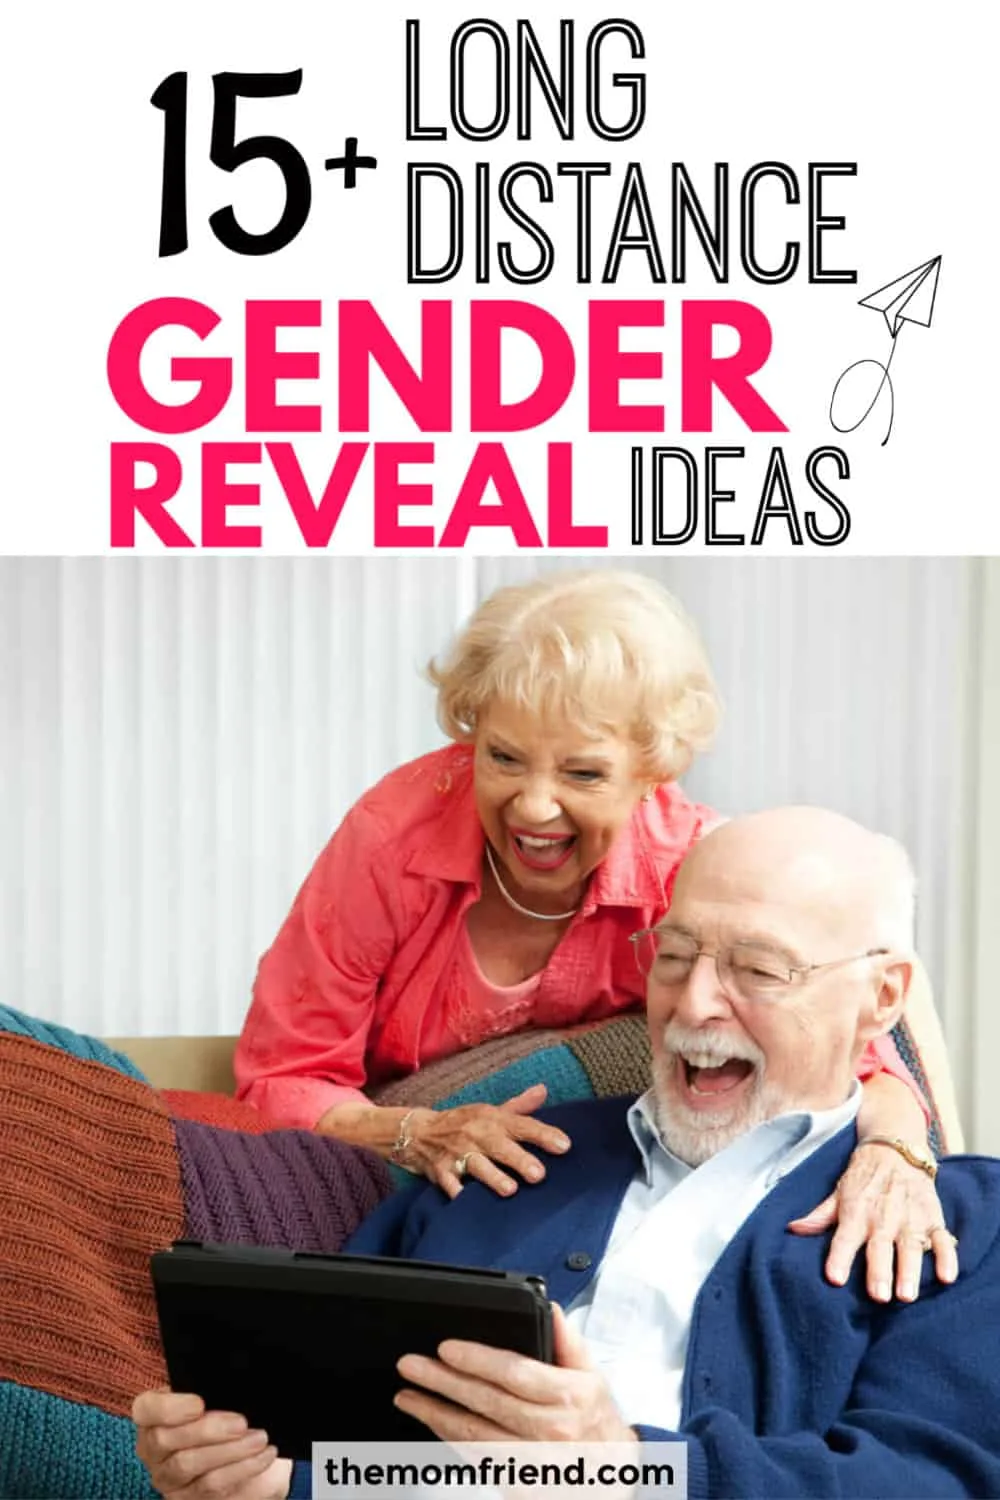 pinnable image for long distance gender reveal ideas